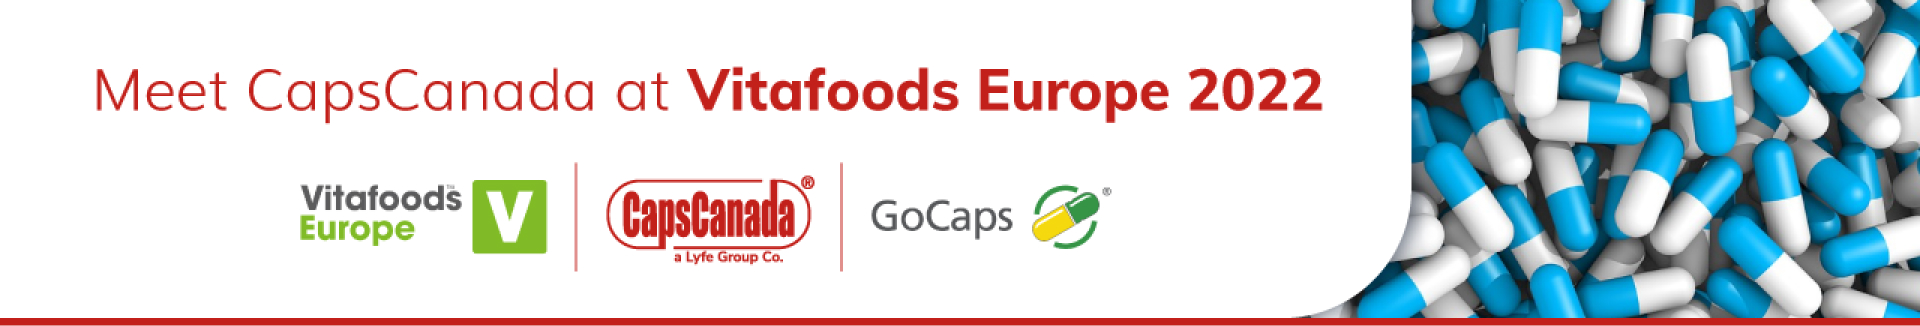 We are present at Vitafoods Europe 2022